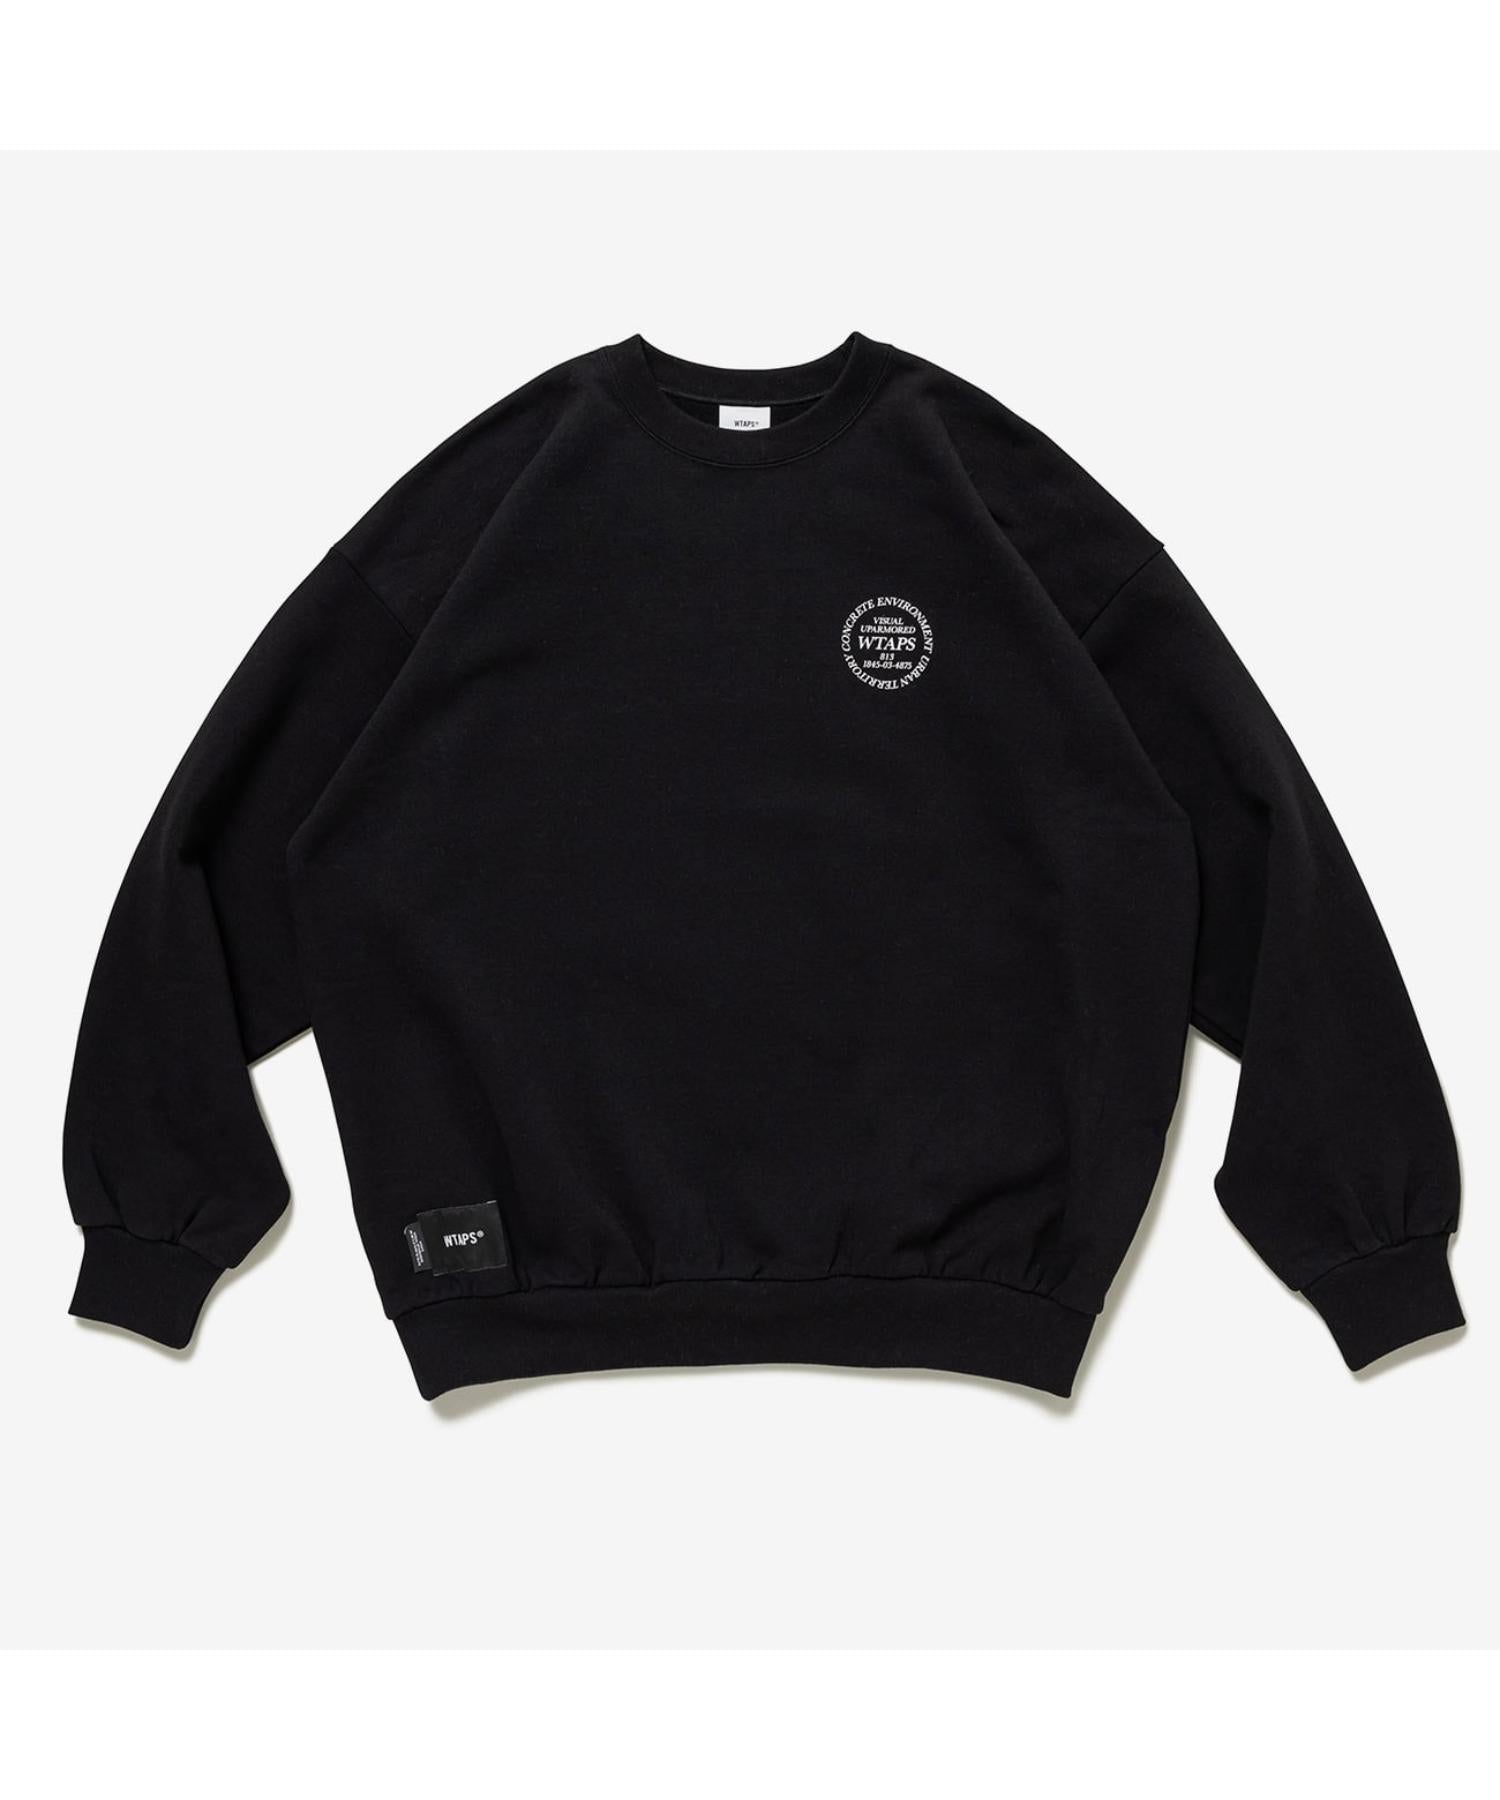 INGREDIENTS / SWEATER / COTTON - WTAPS (ダブルタップス) - tops